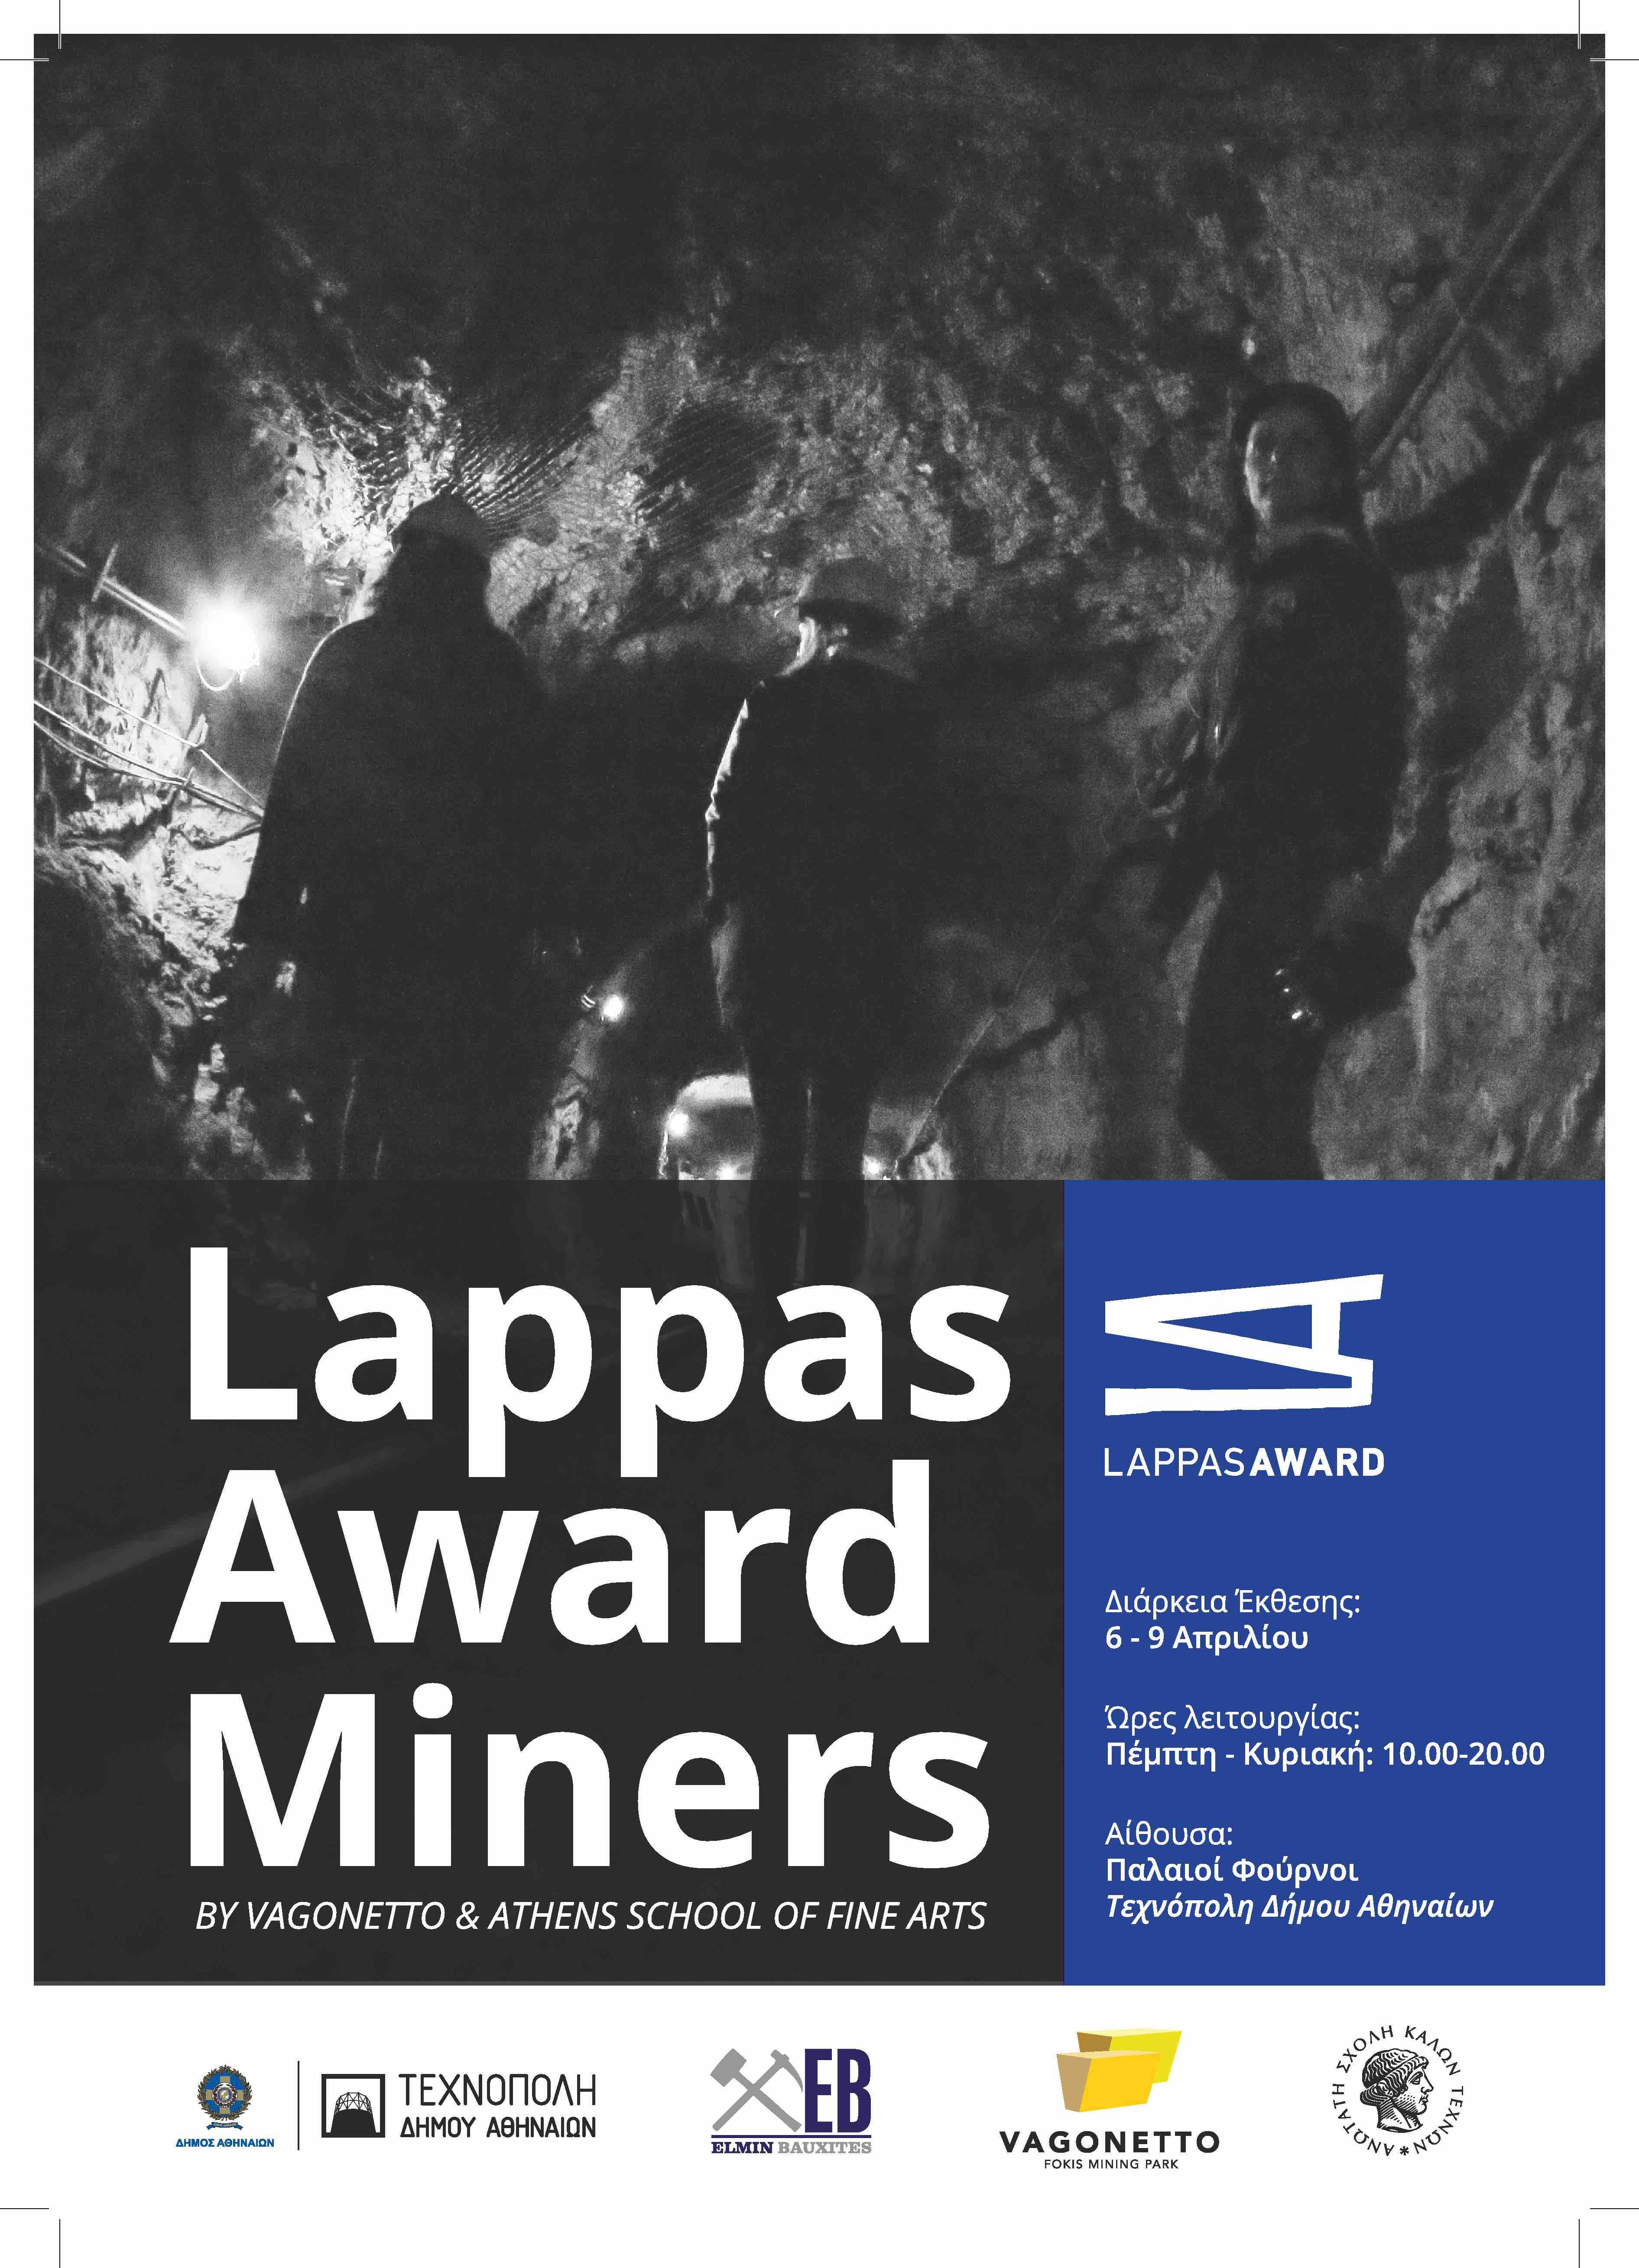 <a class="wonderplugin-gridgallery-posttitle-link" href="http://www.vagonetto.gr/?p=867">Lappas Award Miners by Vagonetto & Athens School of Fine Arts</a>